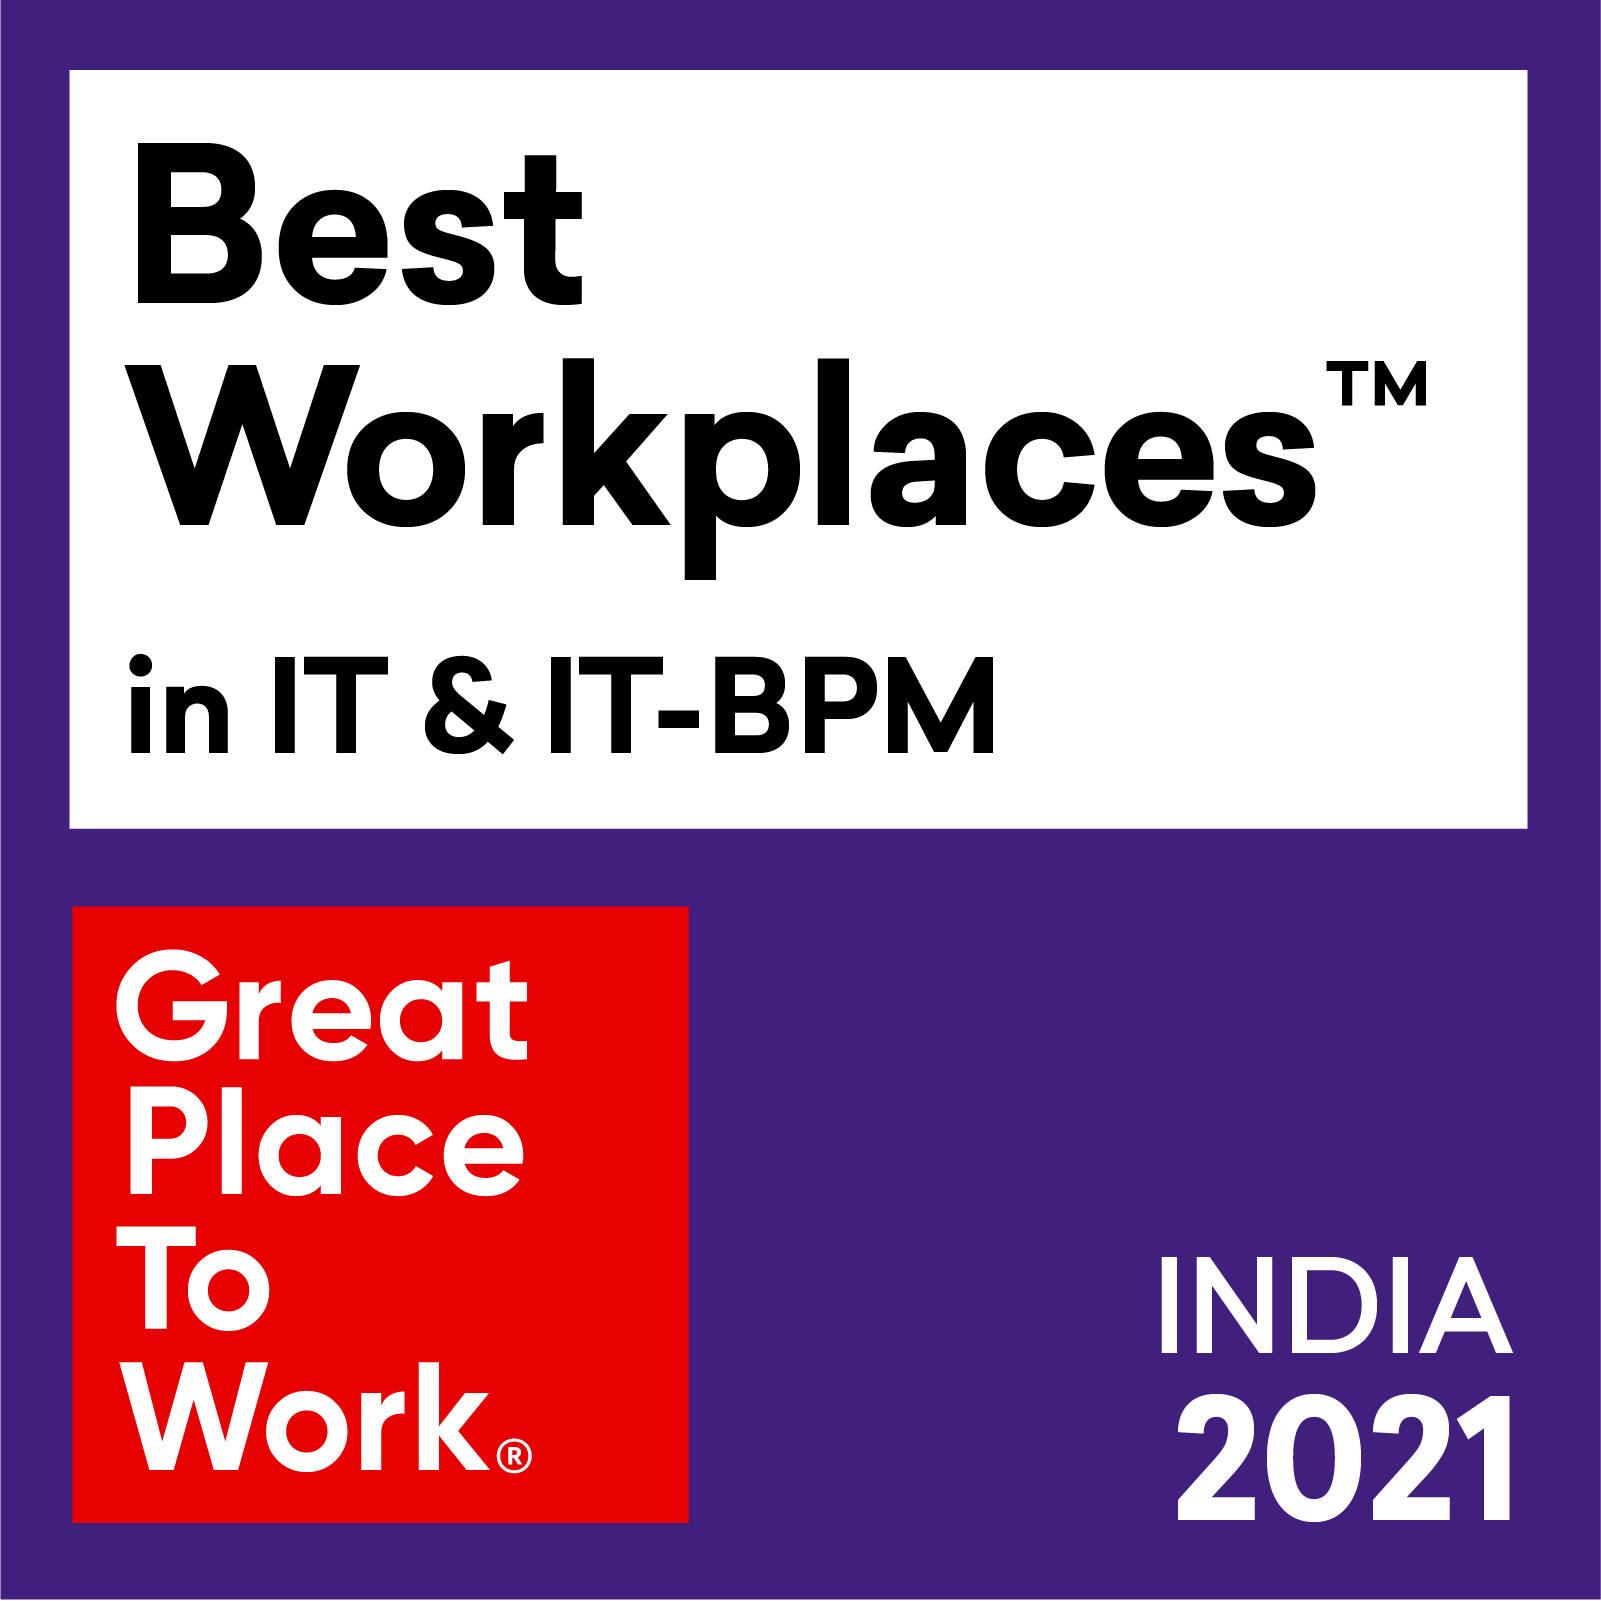 CitiusTech has been recognized as one of India’s Best Workplaces in IT & IT-BPM 2021 for 6 years in a row!